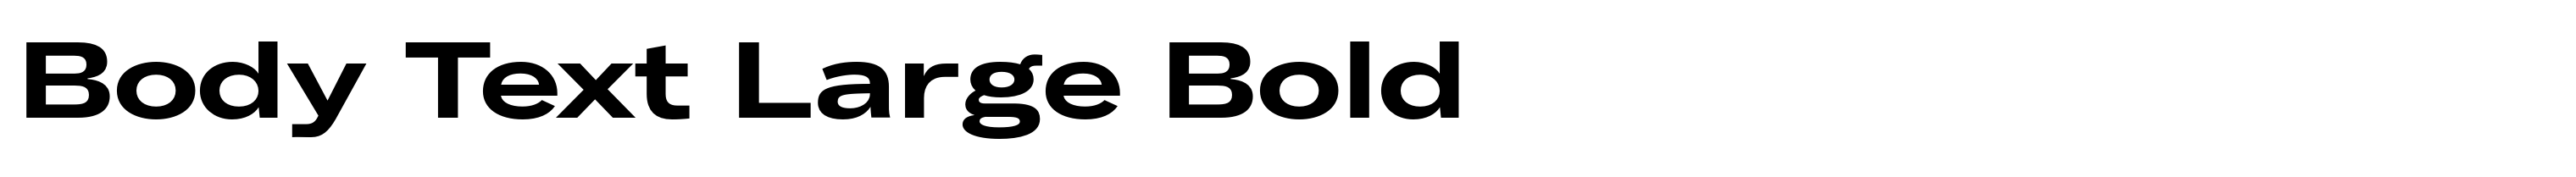 Body Text Large Bold